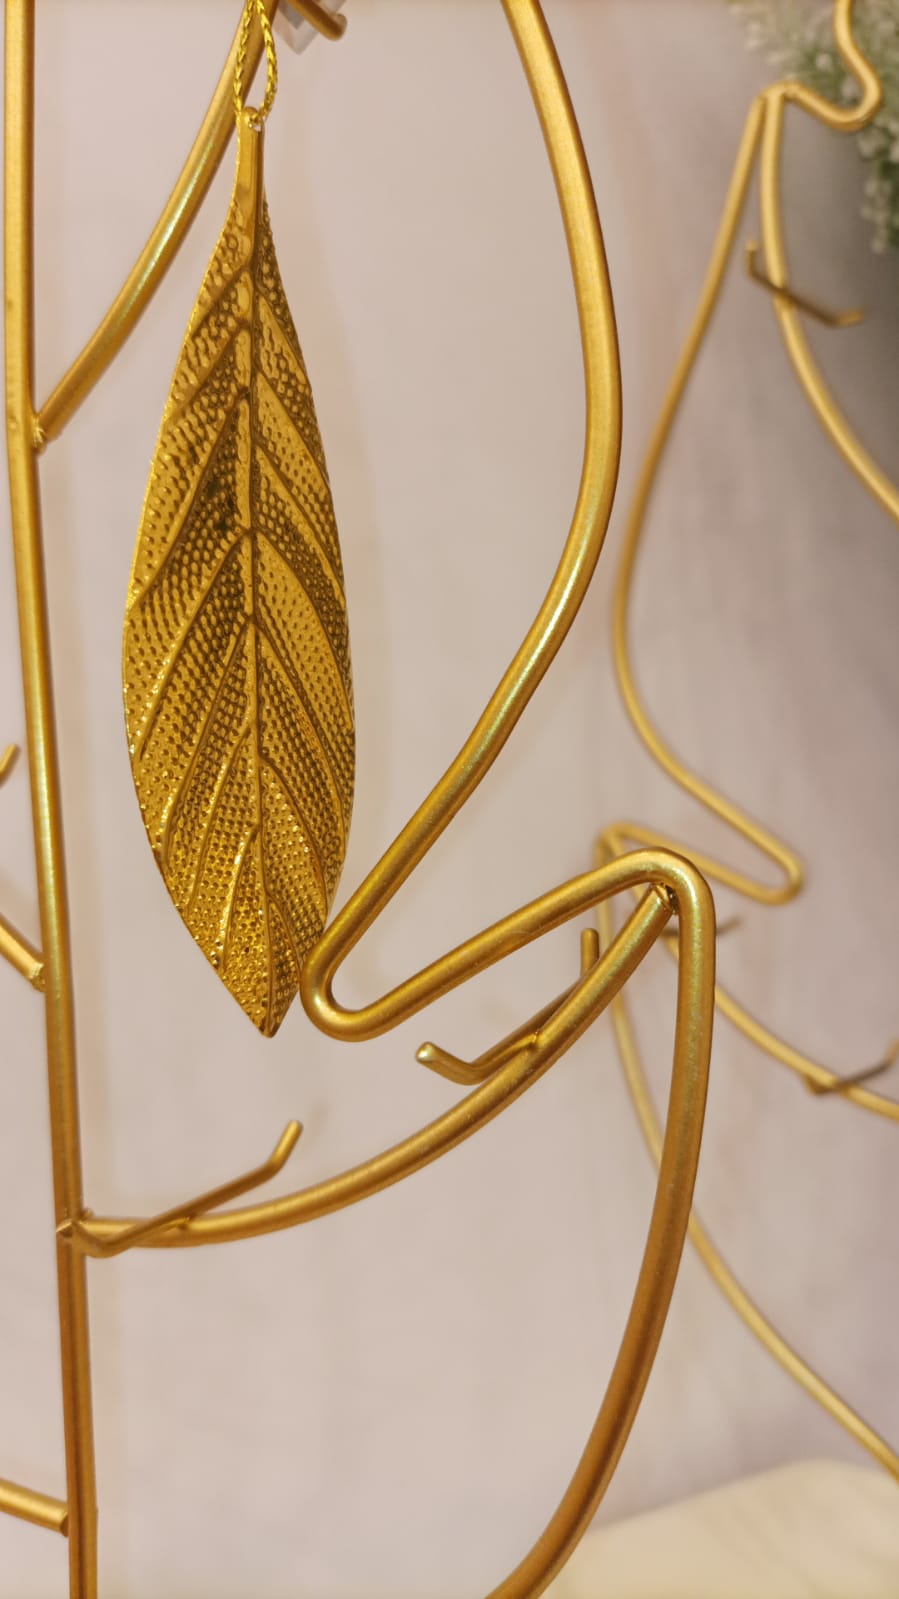 Leaf Metal ACCESSORY WITH HANGE 9x4 Cm Gold